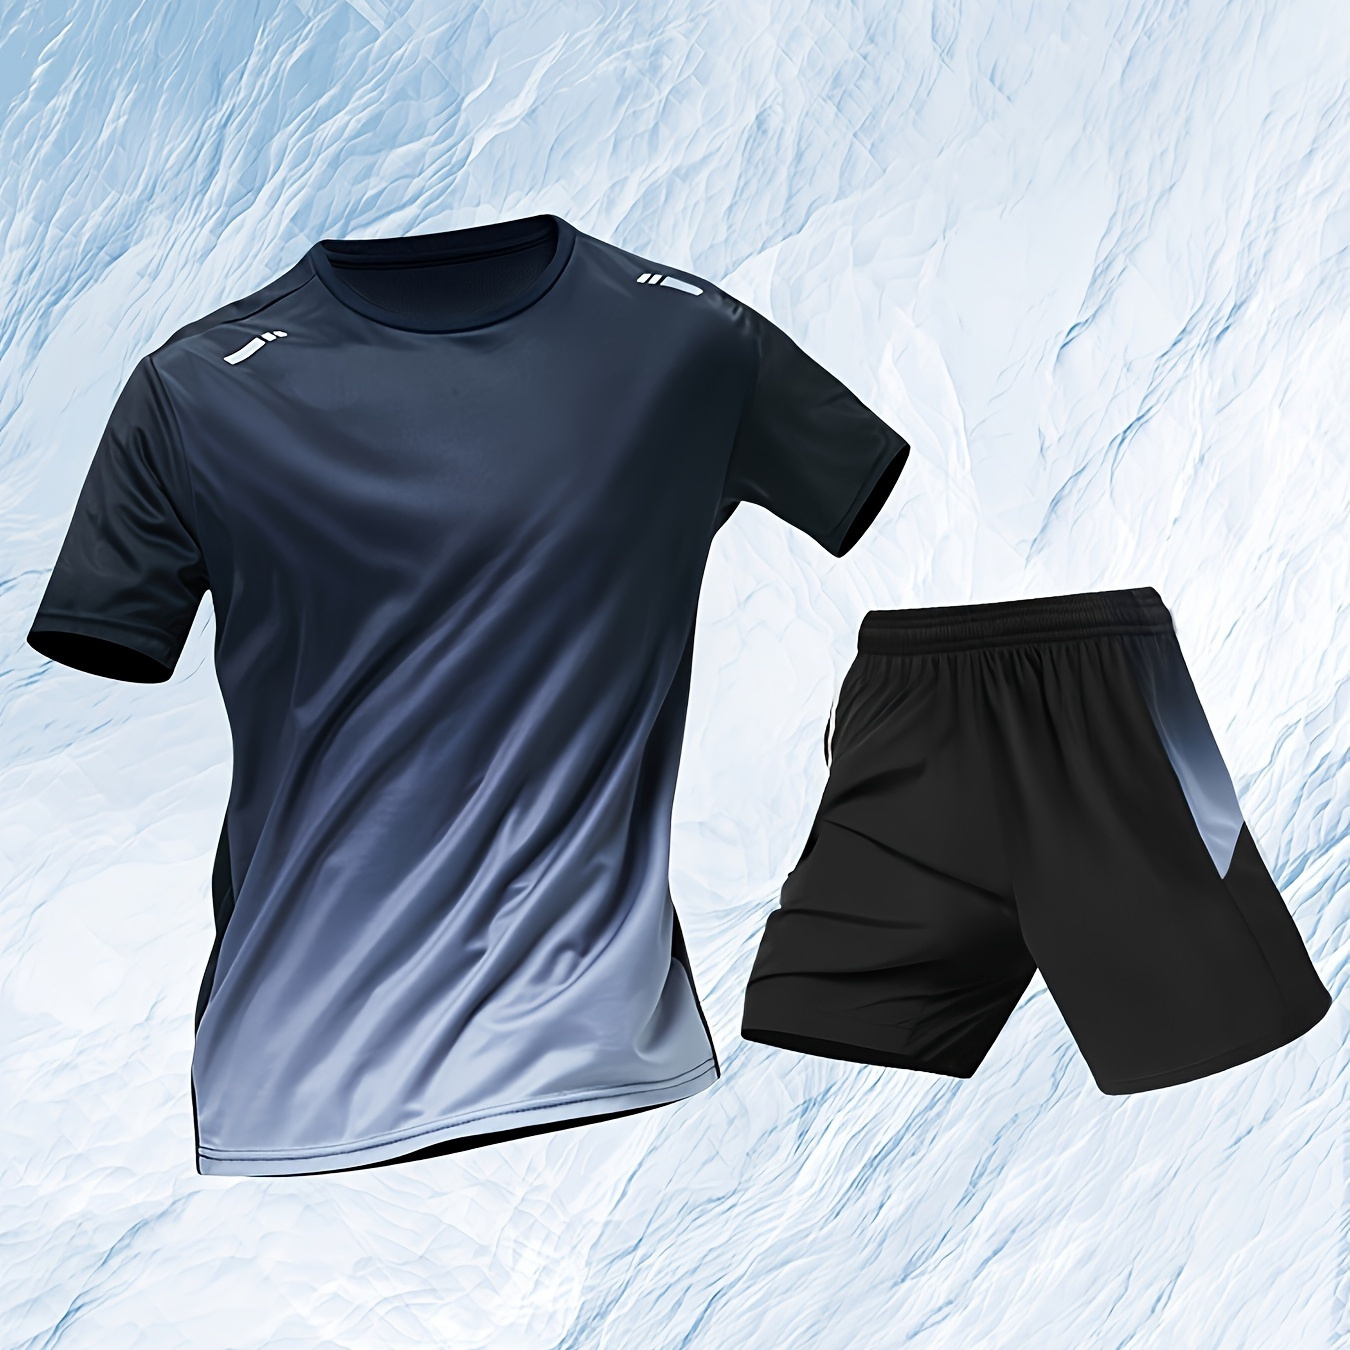 

2-piece Men's Summer Running Jogging Outfit Set, Men's Gradient Short Sleeve Breathable T-shirt & Active Shorts With Pockets